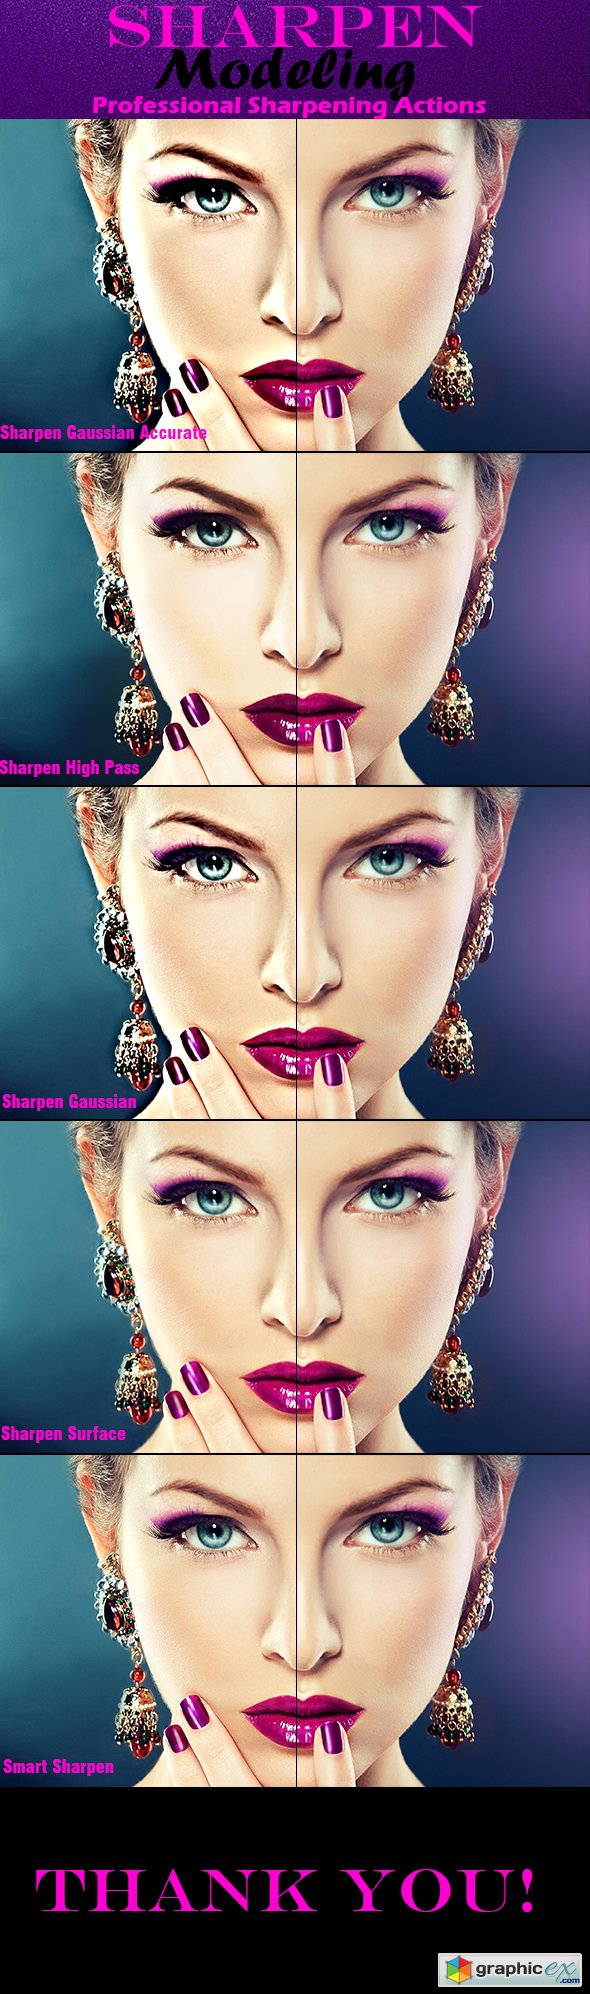 5 Sharpen Beauty PS Actions